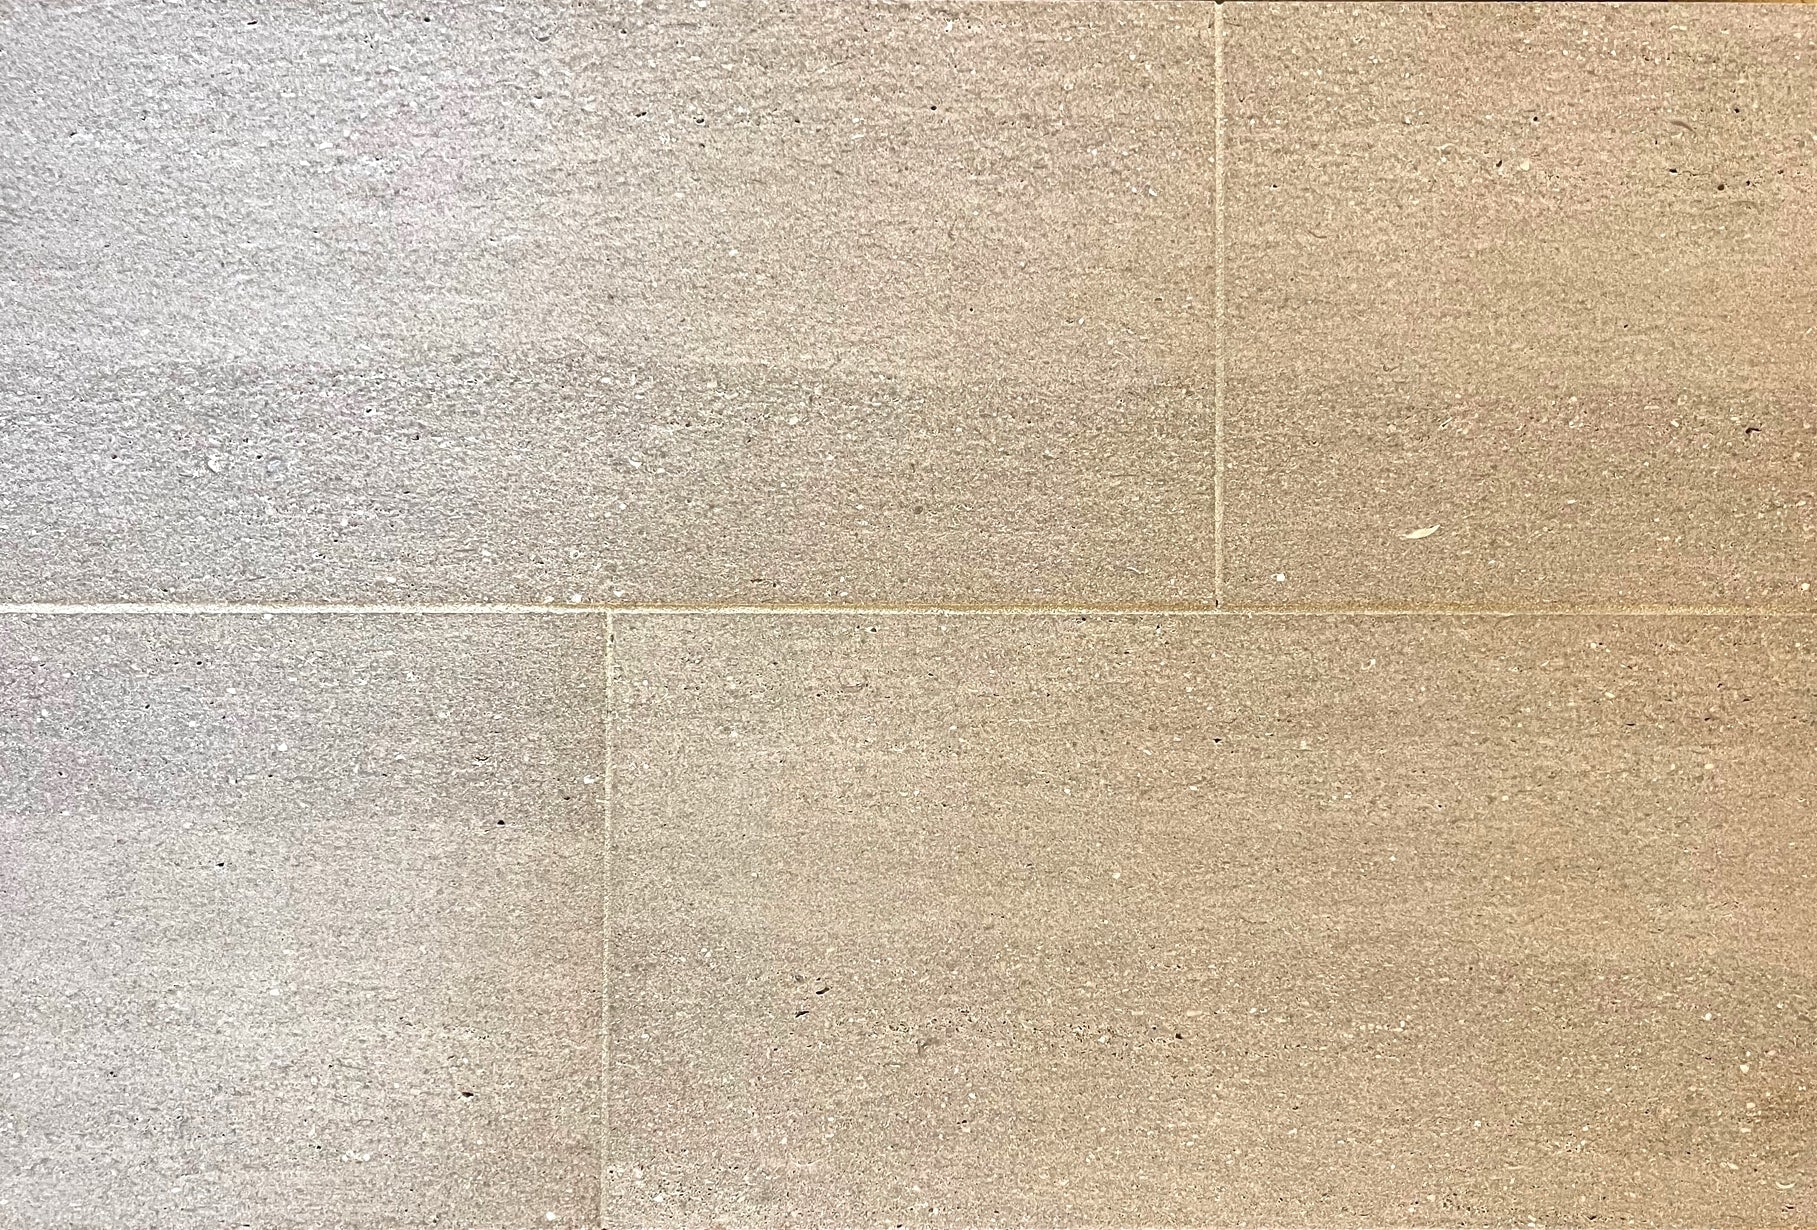 american limestone indiana versailles pattern interior natural stone tile for floor and wall made in united states distributed by surface group international